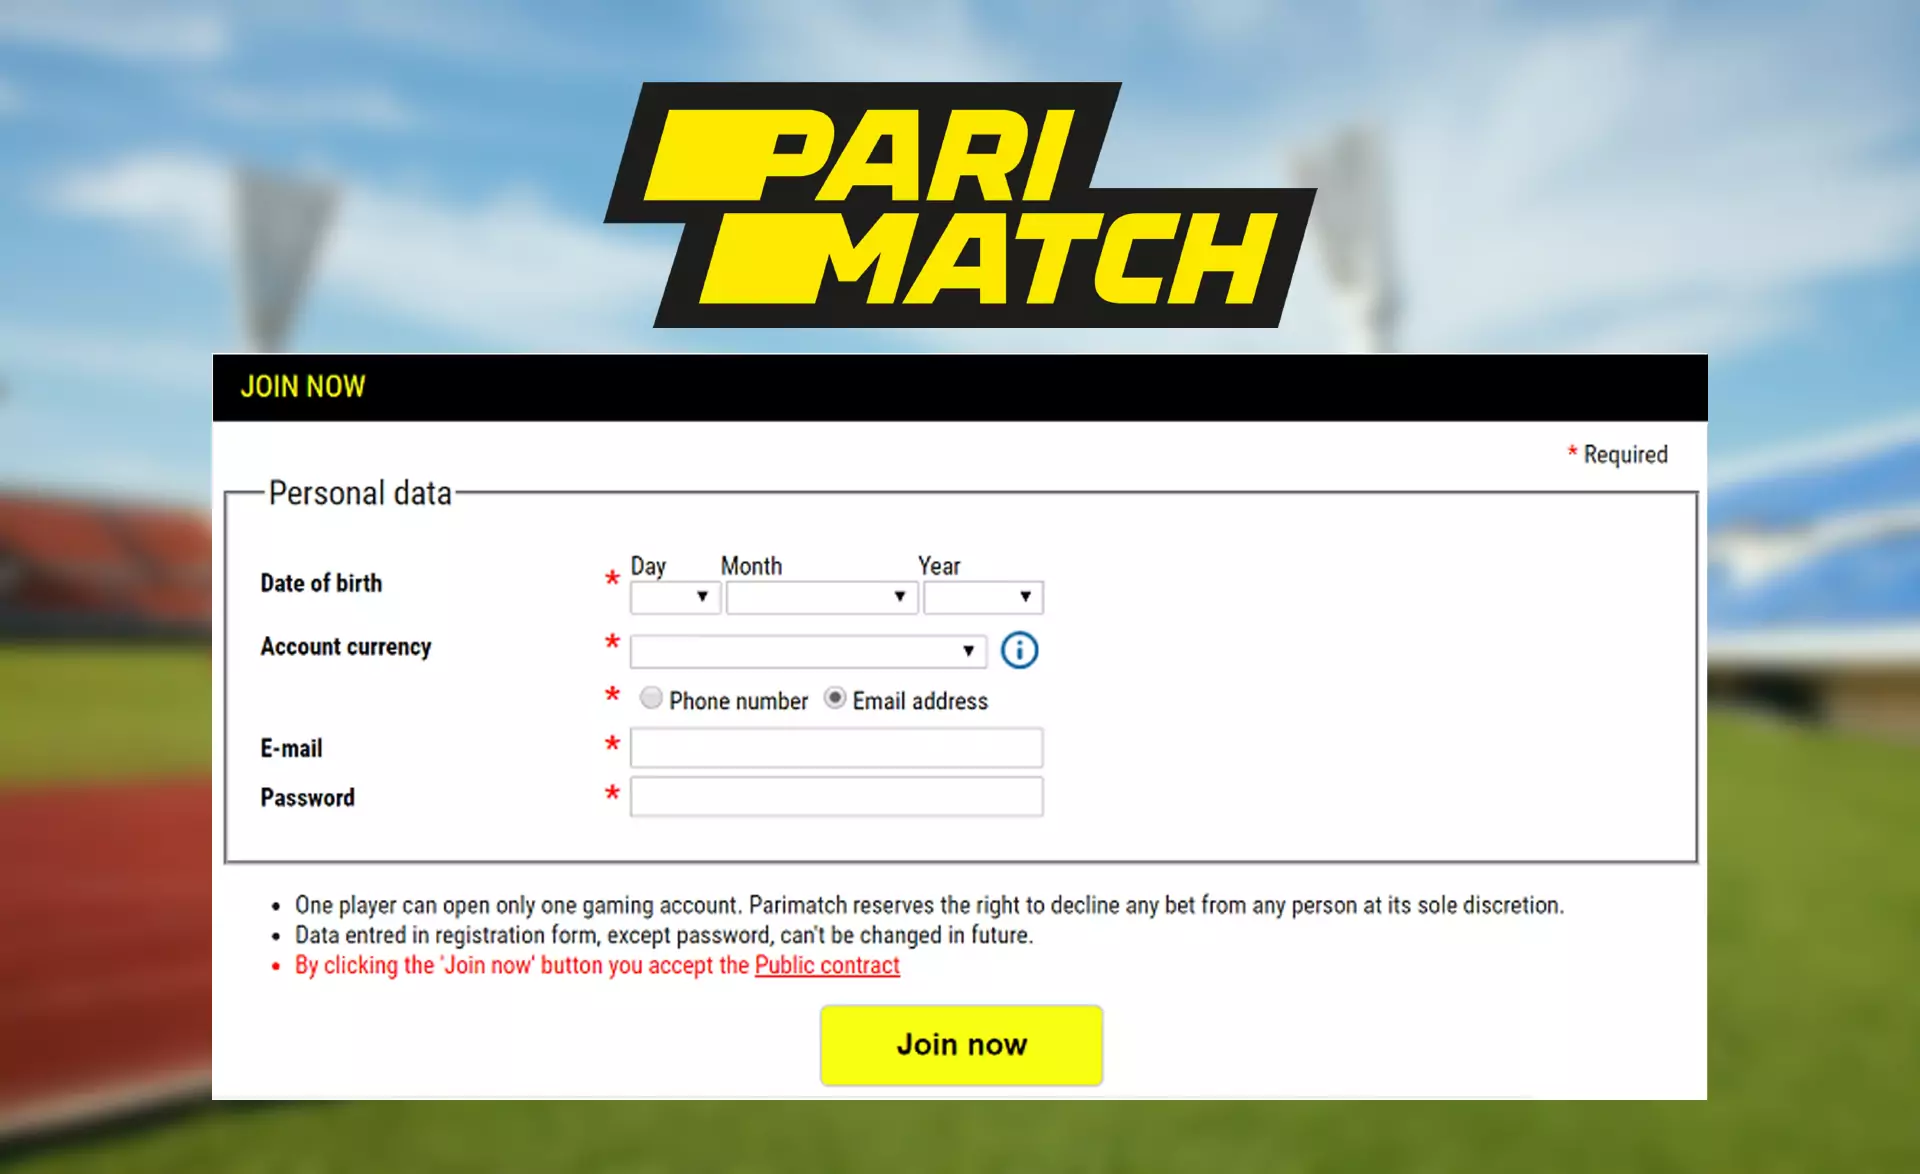 Register a new Parimatch account to bet on cricket.